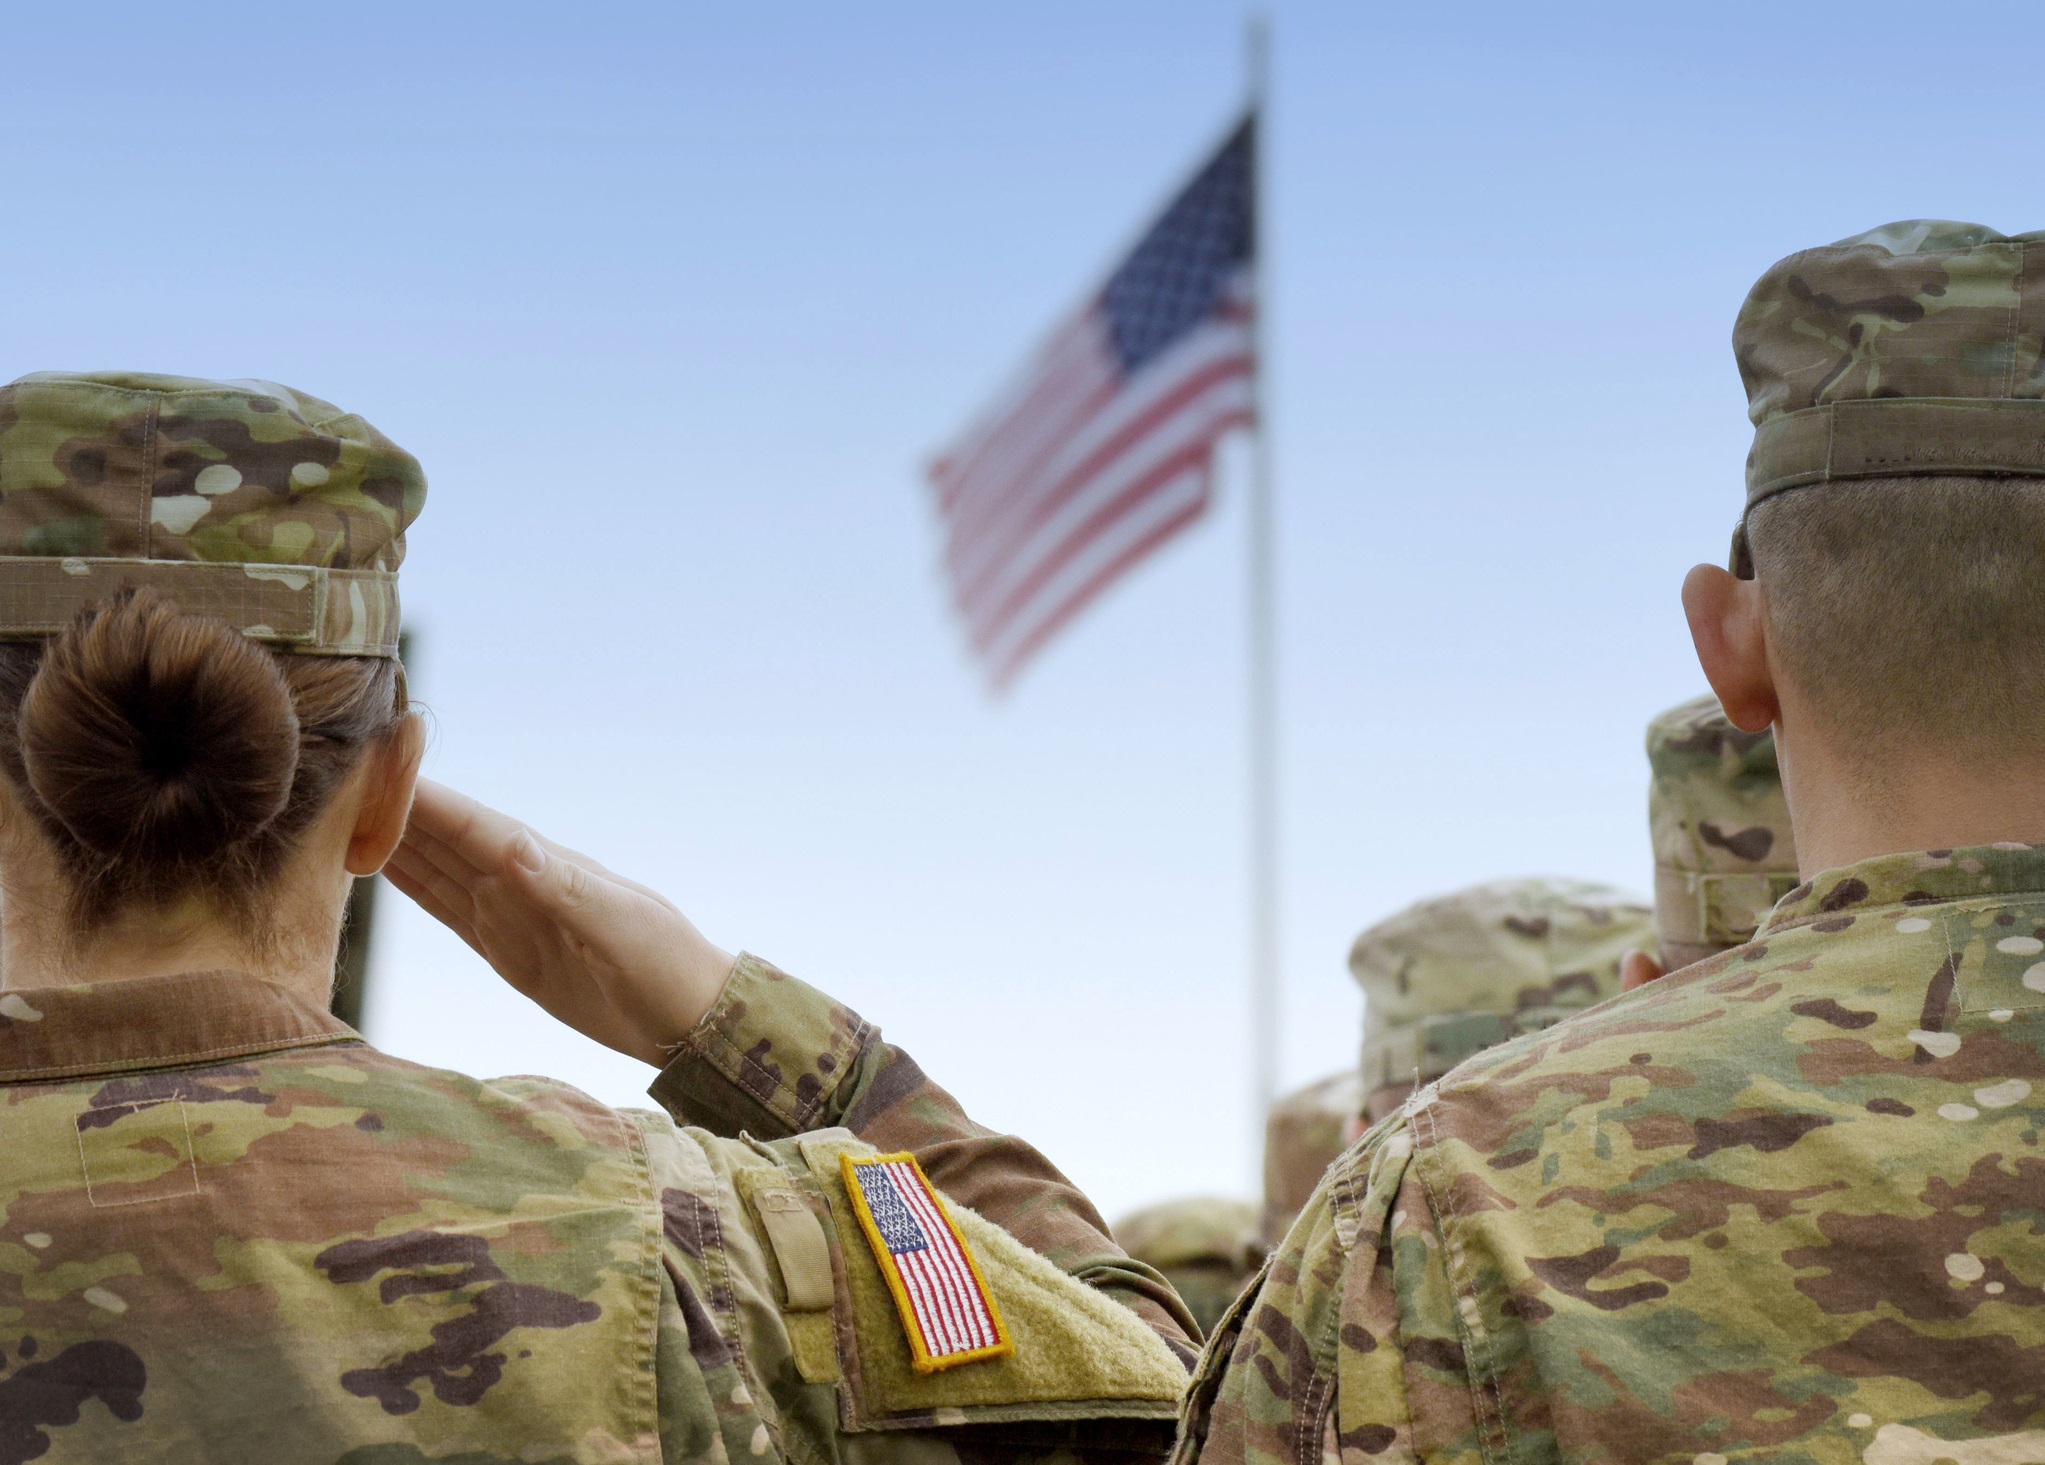 U.S. soldiers are shown from behind saluting a U.S. flag.